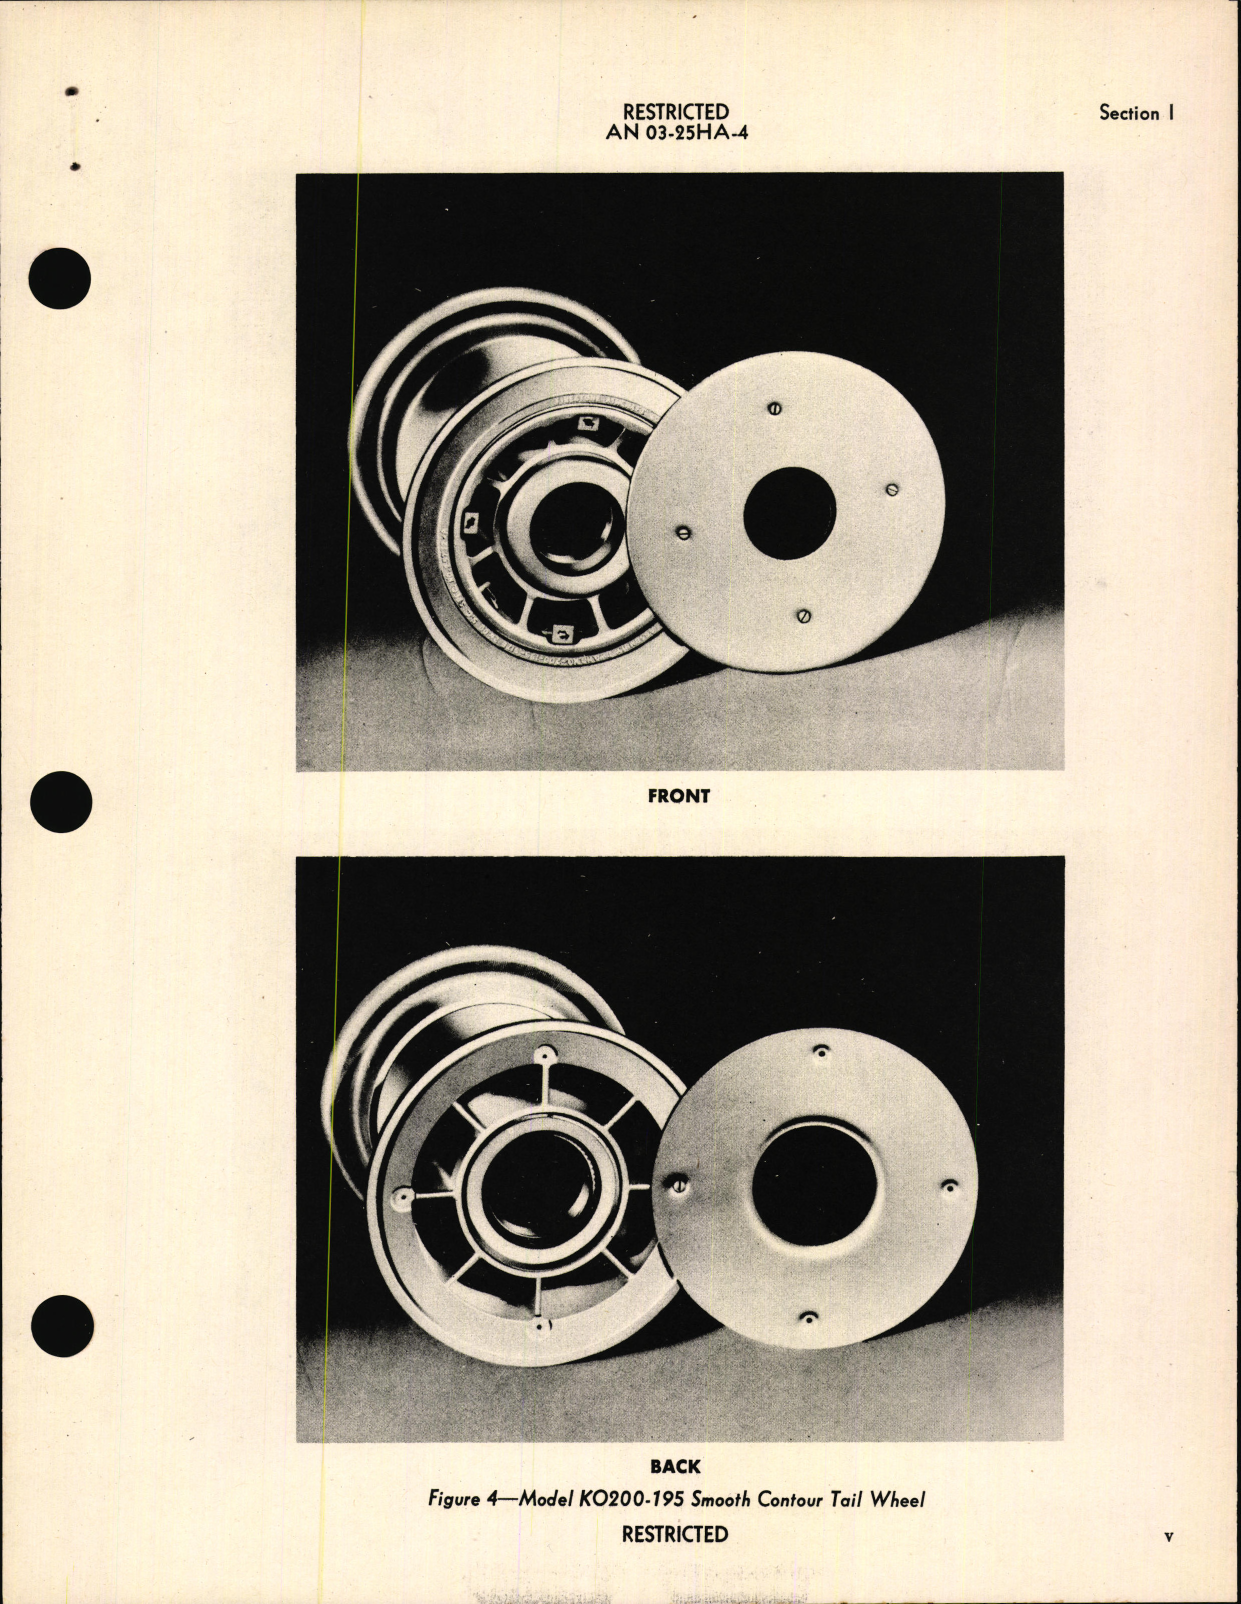 Sample page 7 from AirCorps Library document: Handbook of Instructions with Parts Catalog for Tail Wheels (Firestone)